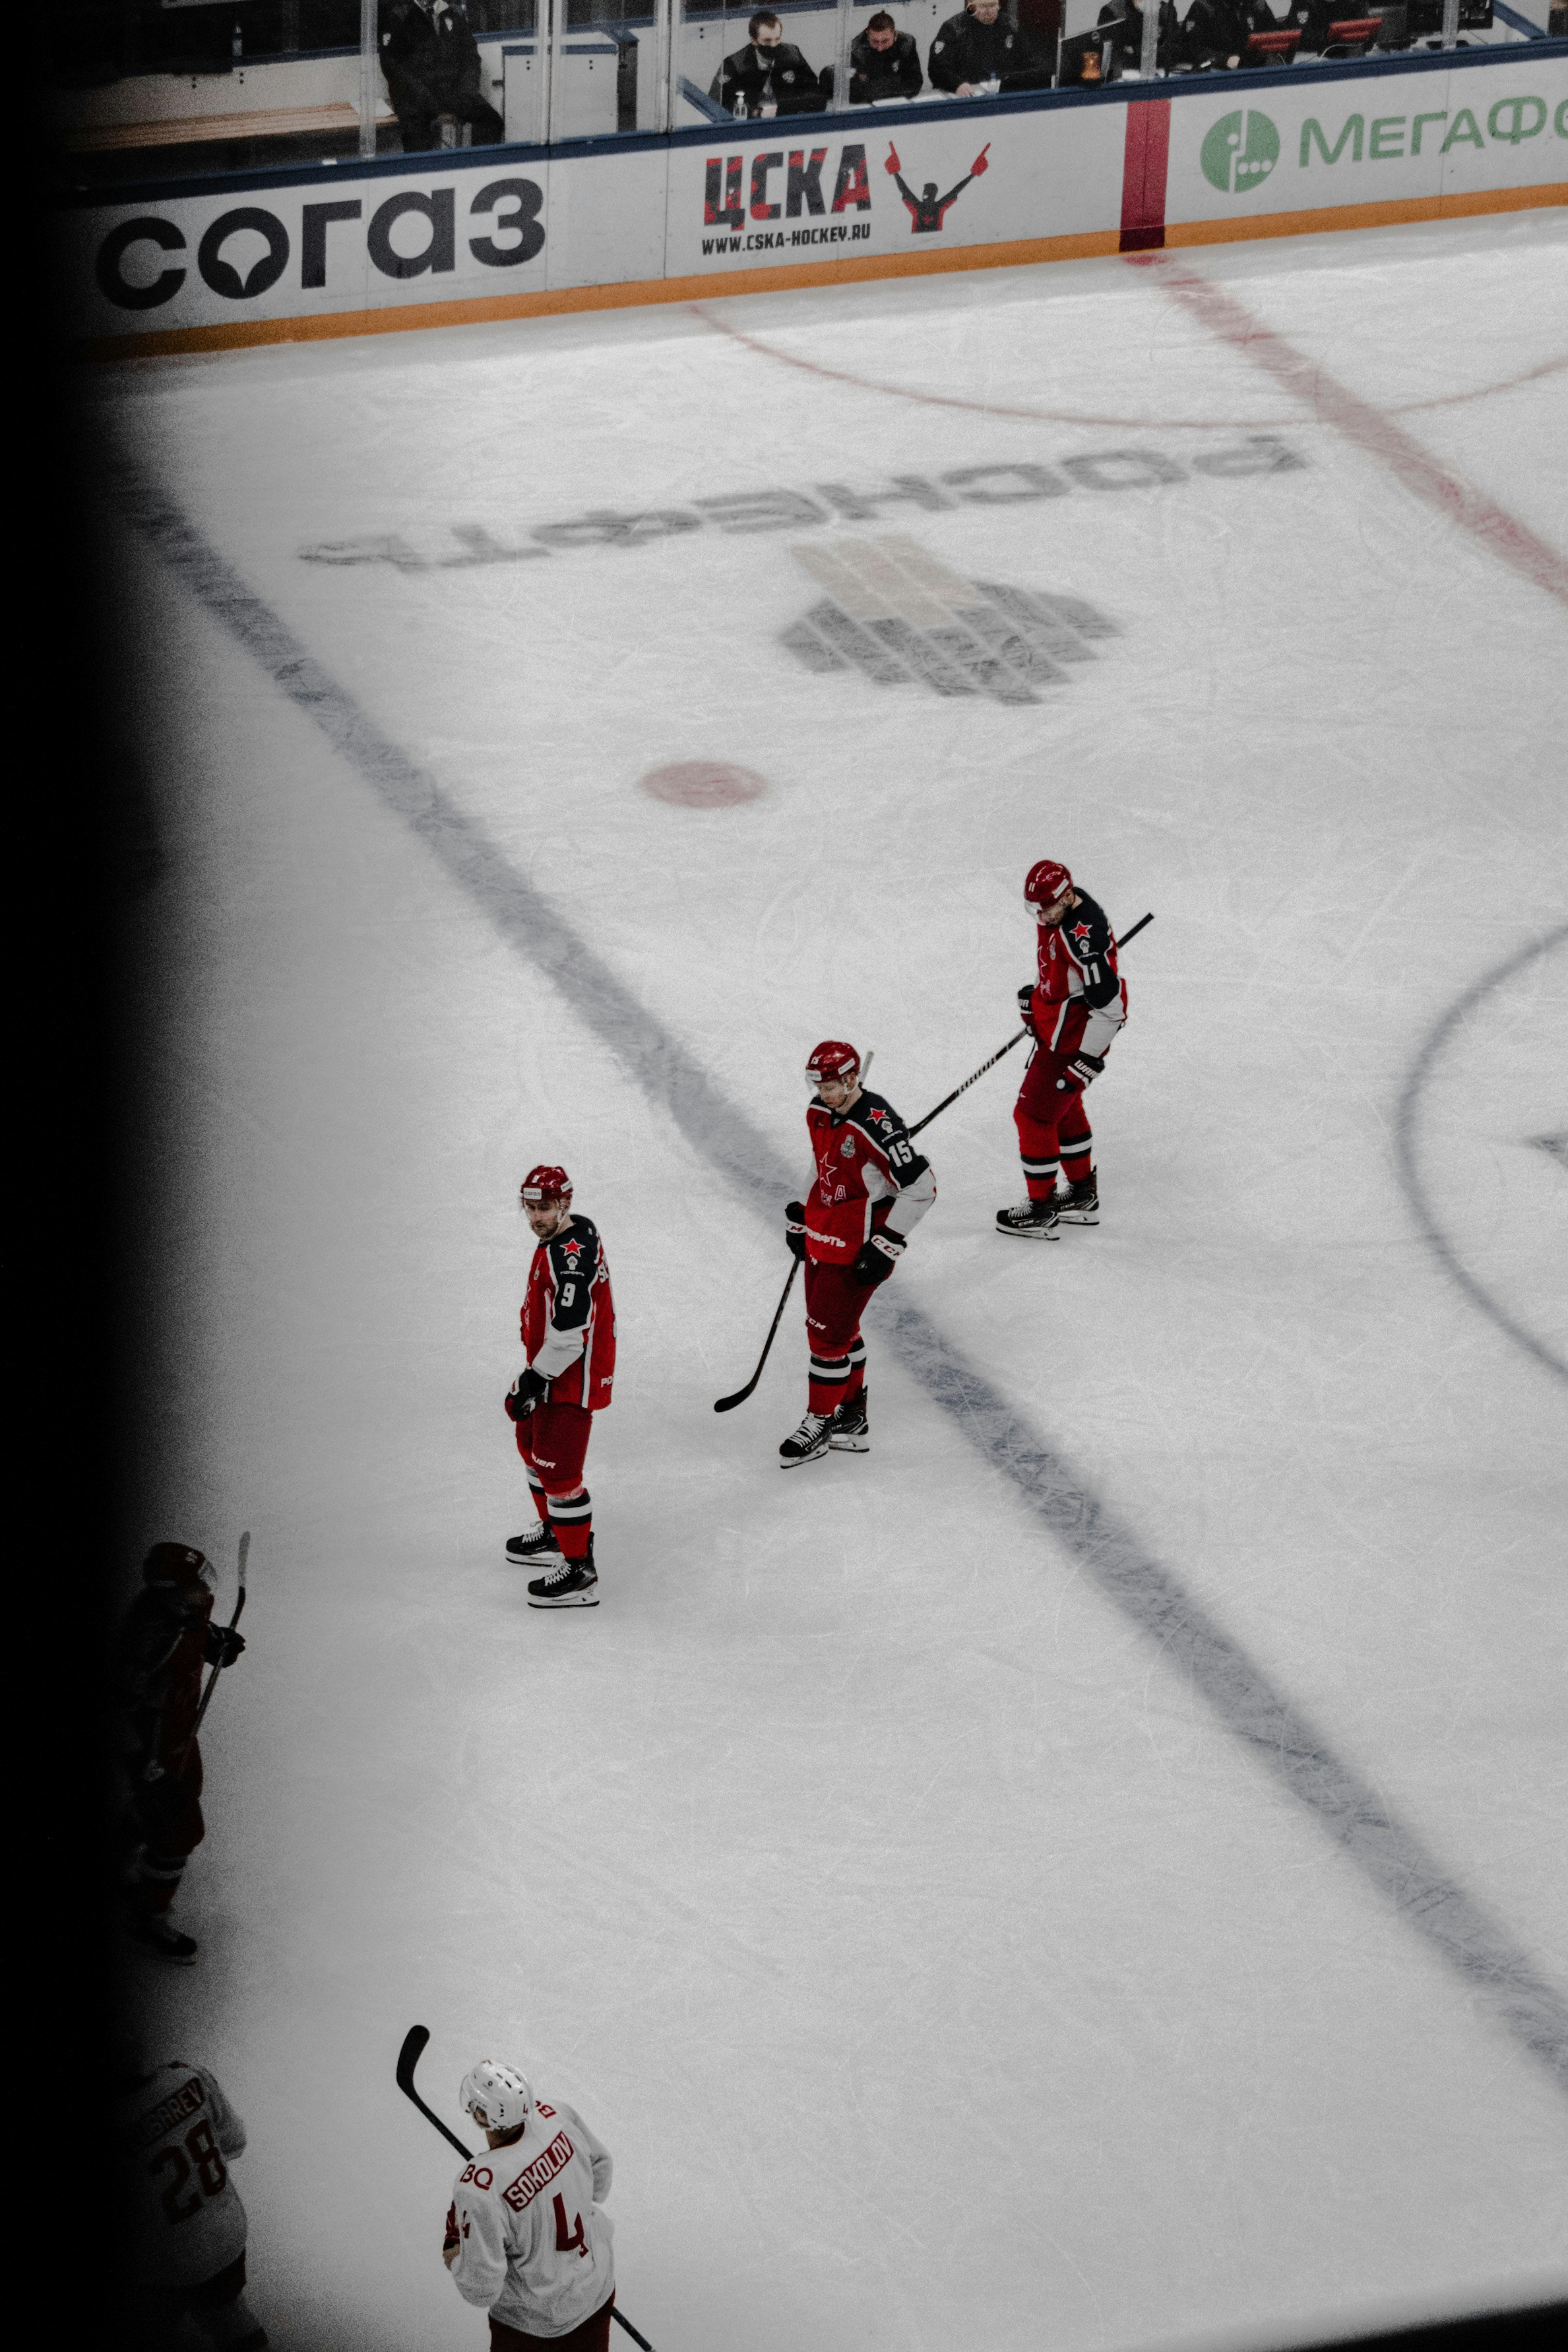 3 men in red and white ice hockey jersey playing on ice field